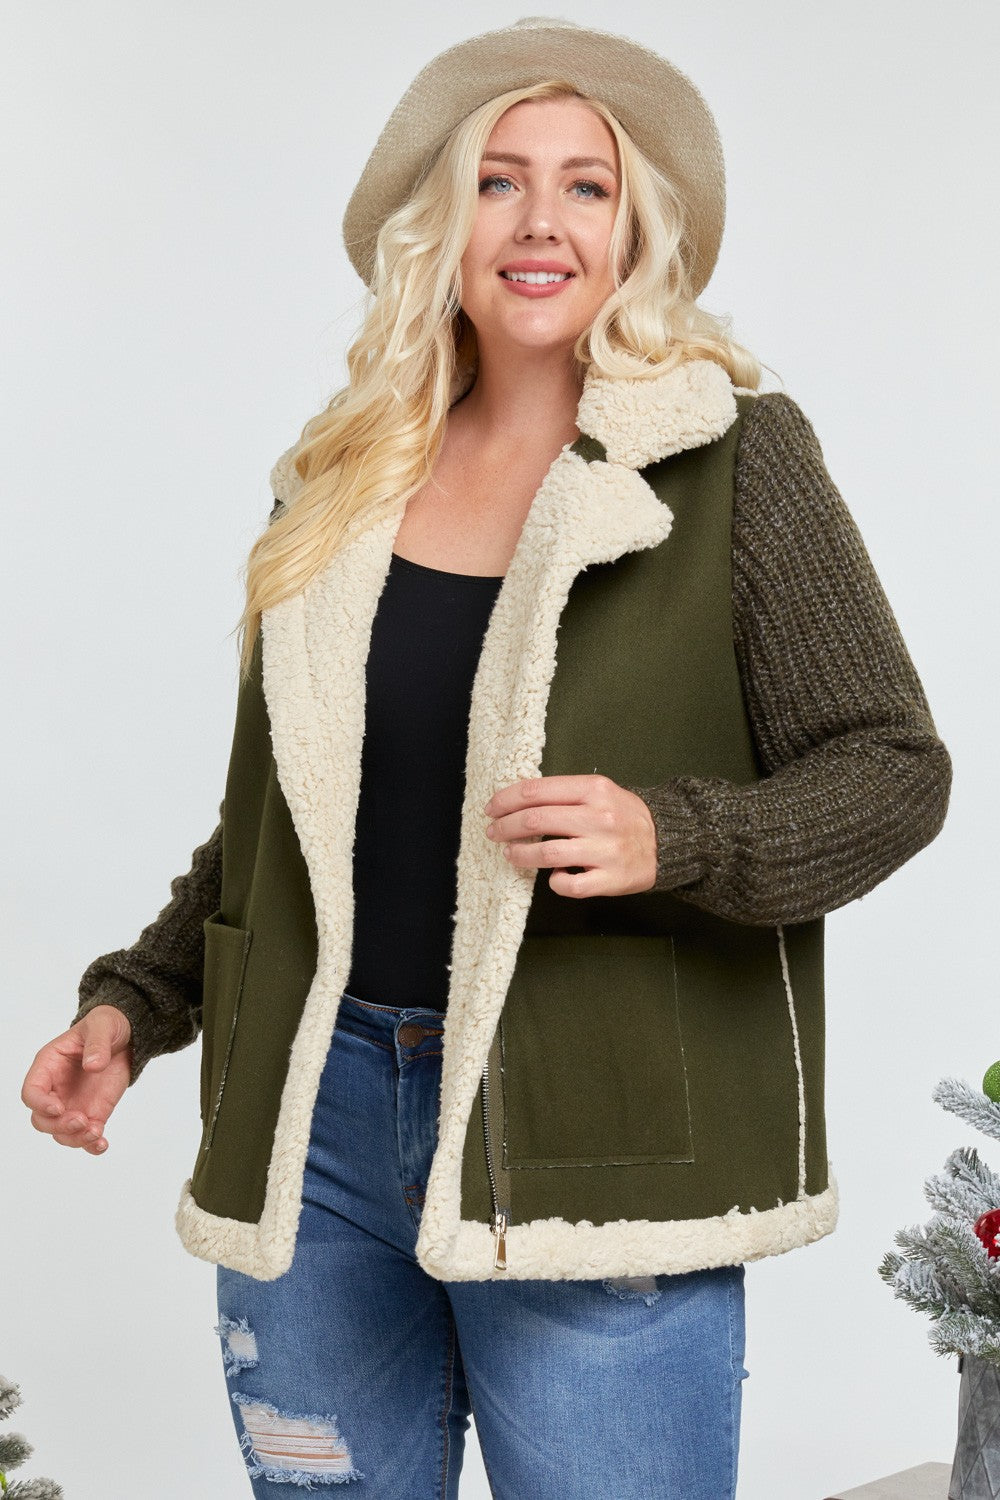 Olive green faux suede jacket coat women's ladies winter fall sweater sleeve sherpa soft fuzzy moss green. Modern smart causal female chic effortless outfit womens ladies gift elegant effortless clothing clothes apparel outfits chic summer style women’s boutique trendy fall back to school teacher office cute outfit  lounge athleisure midsize curvy sizes plus size